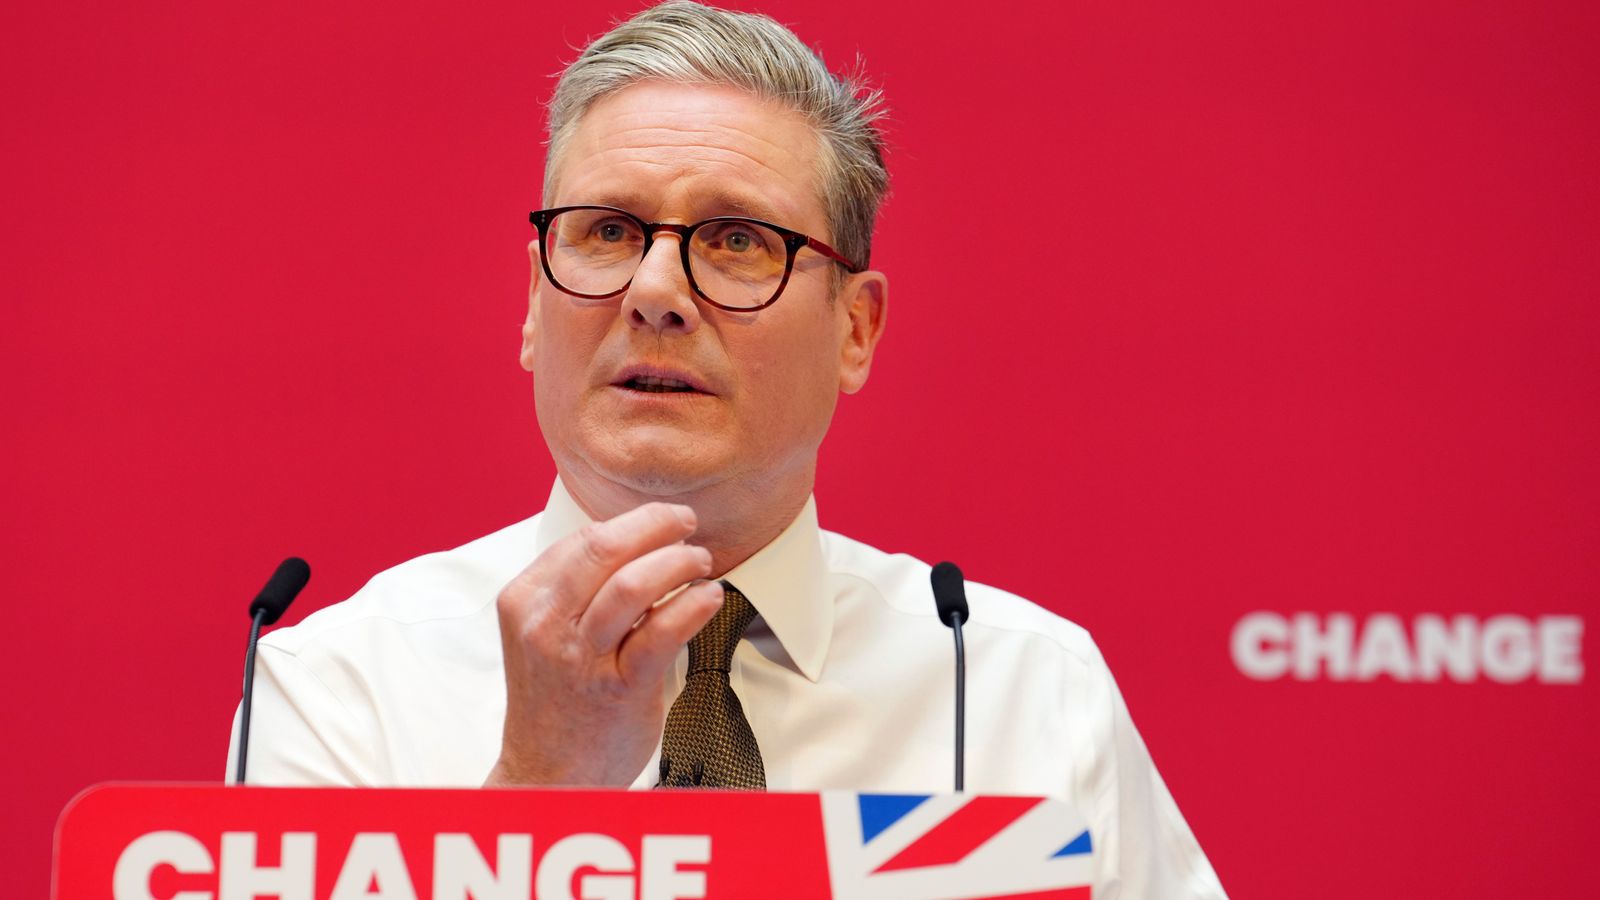 Labour launches manifesto as Sir Keir Starmer pledges to end political 'pantomime' and 'rebuild Britain'